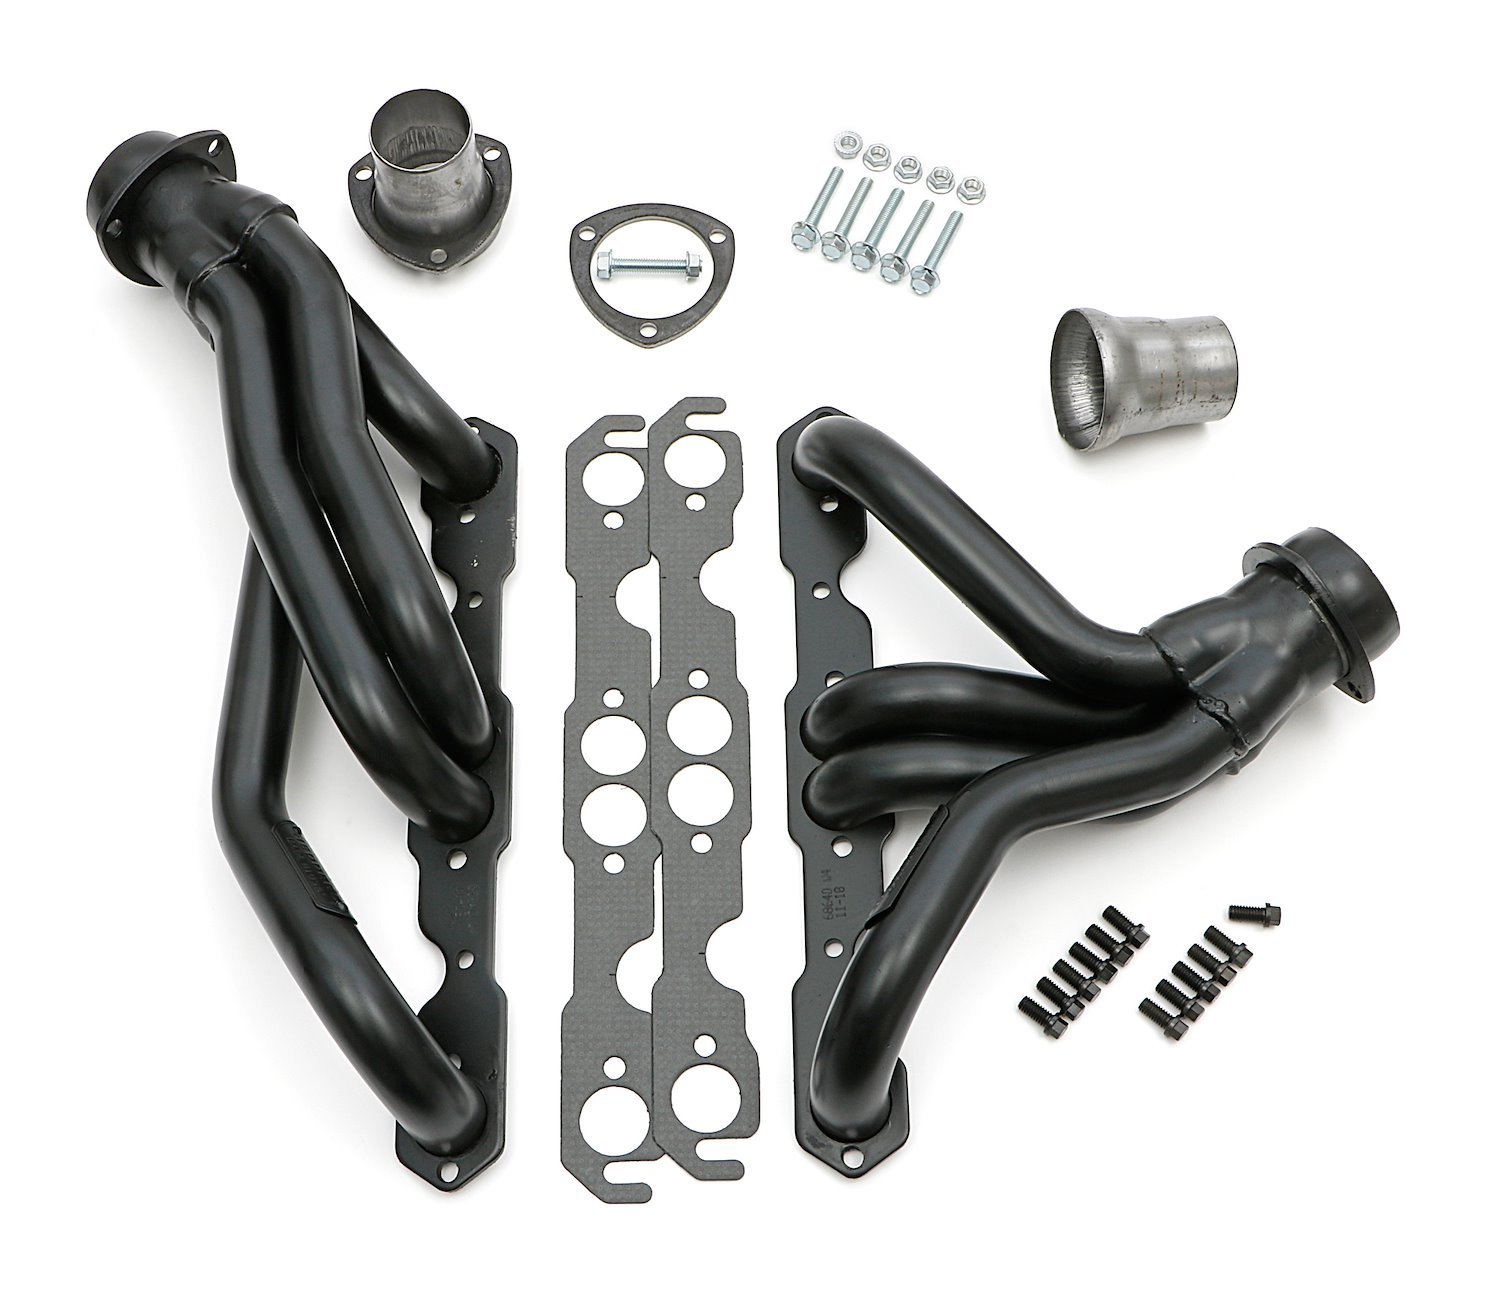 Standard-Duty Mid-Length Headers for 1967-1969 Chevy Camaro, 1968 Chevy II, 1969-1974 Chevy Nova [Uncoated Finish]